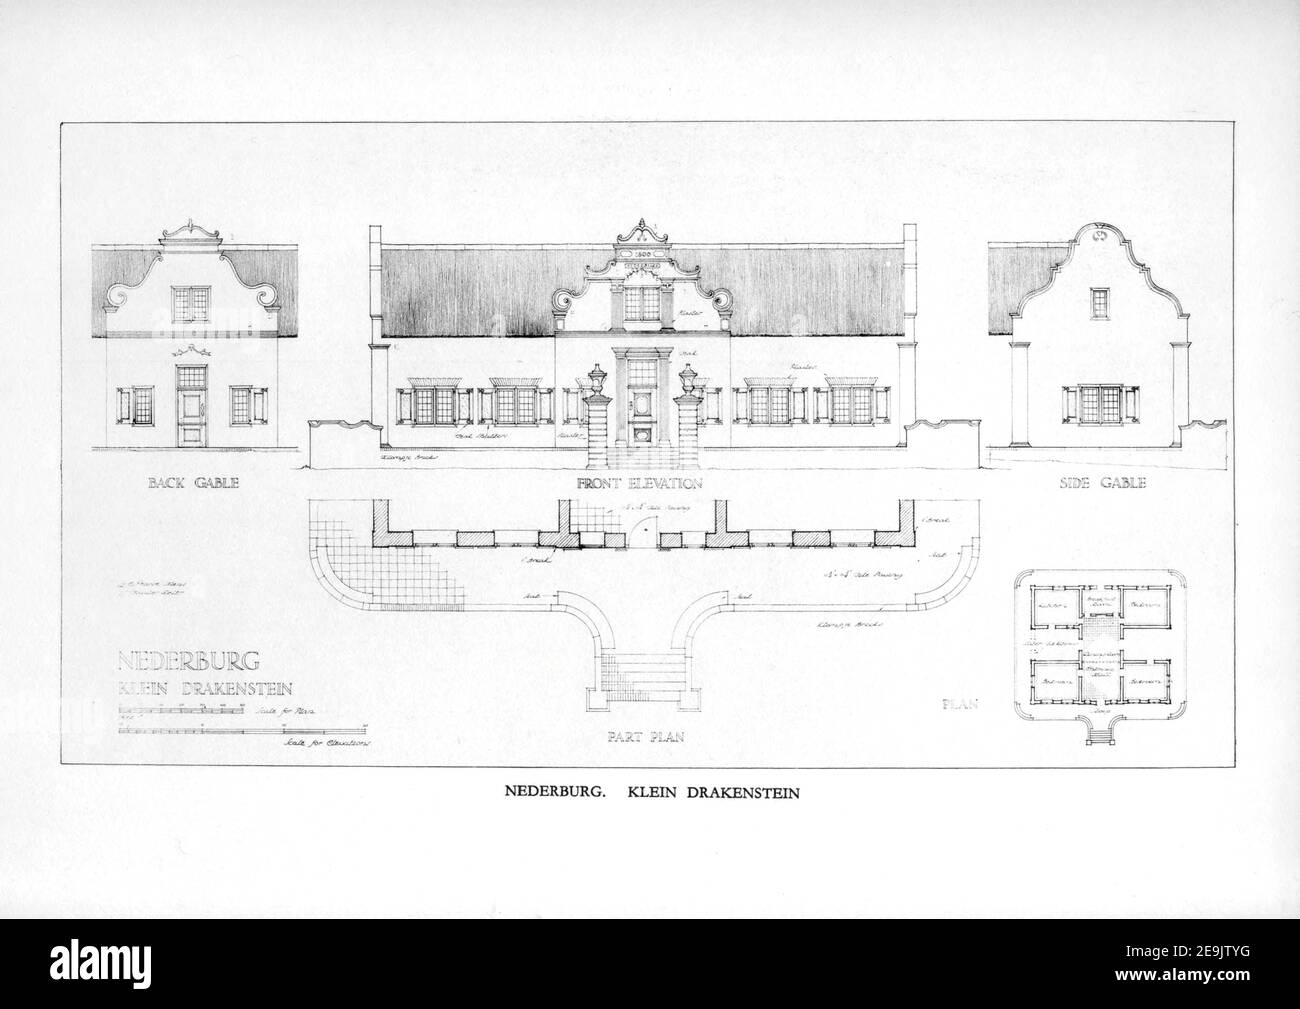 Nederburg, Klein Drakenstein From the book ' Eighteenth century architecture in South Africa ' by Geoffrey Eastcott Pearse. Published by A.A. Balkema, Cape Town in 1933 G. E. Pearse was among the first to bring Cape architecture to a wide audience in a scholarly way. Eighteenth Century Architecture in South Africa was the result of many years research on the topic and remains an important reference work for the subject. Stock Photo